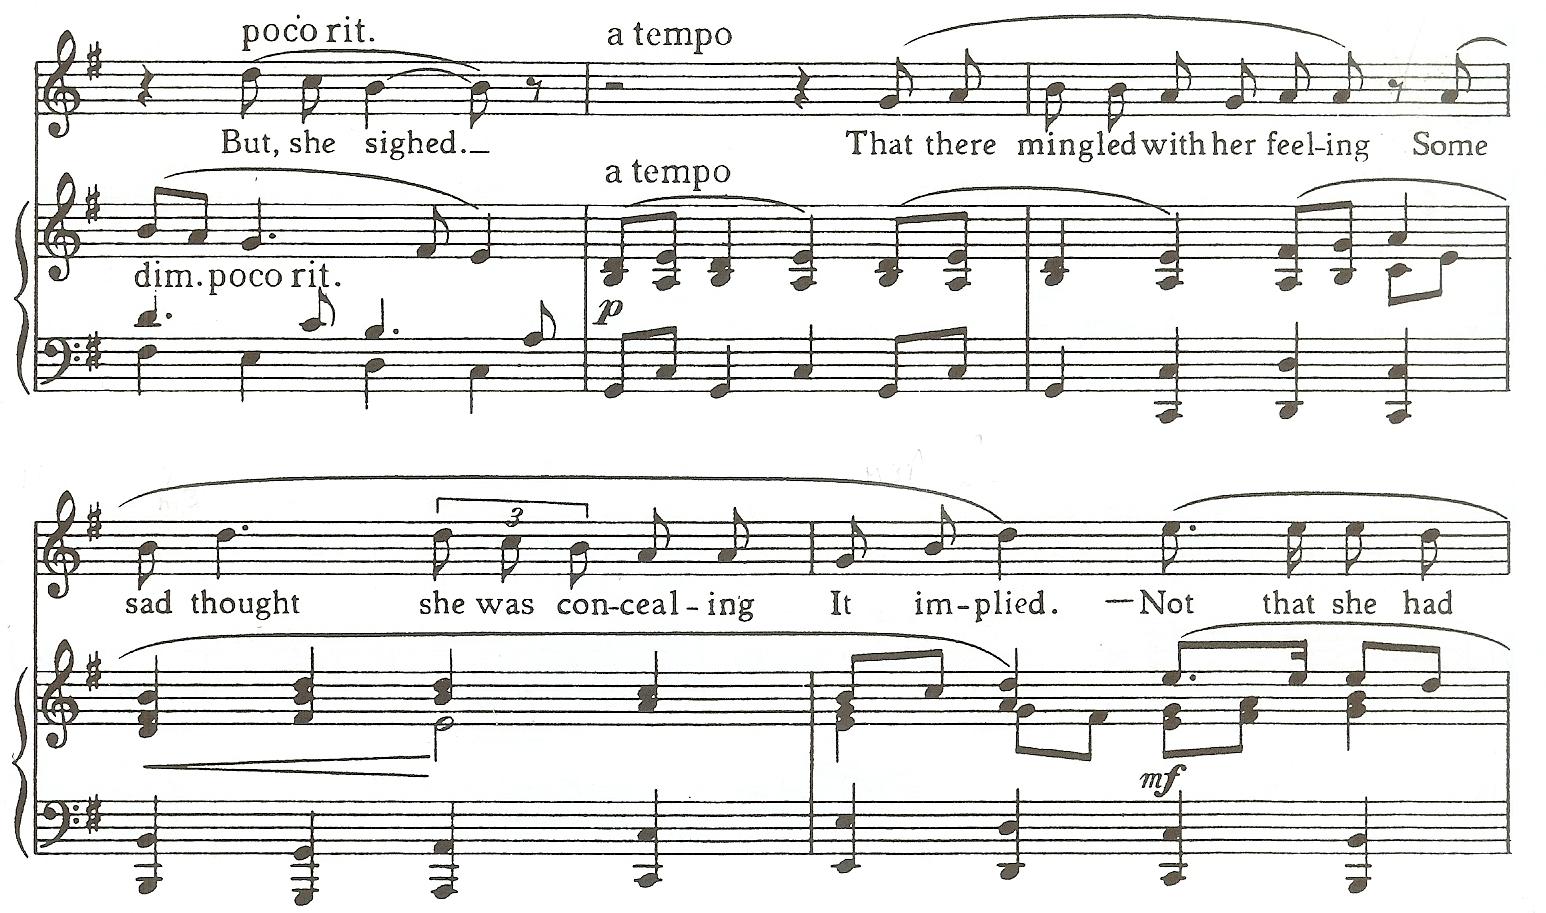 Example 18. The Sigh, measures 8-12